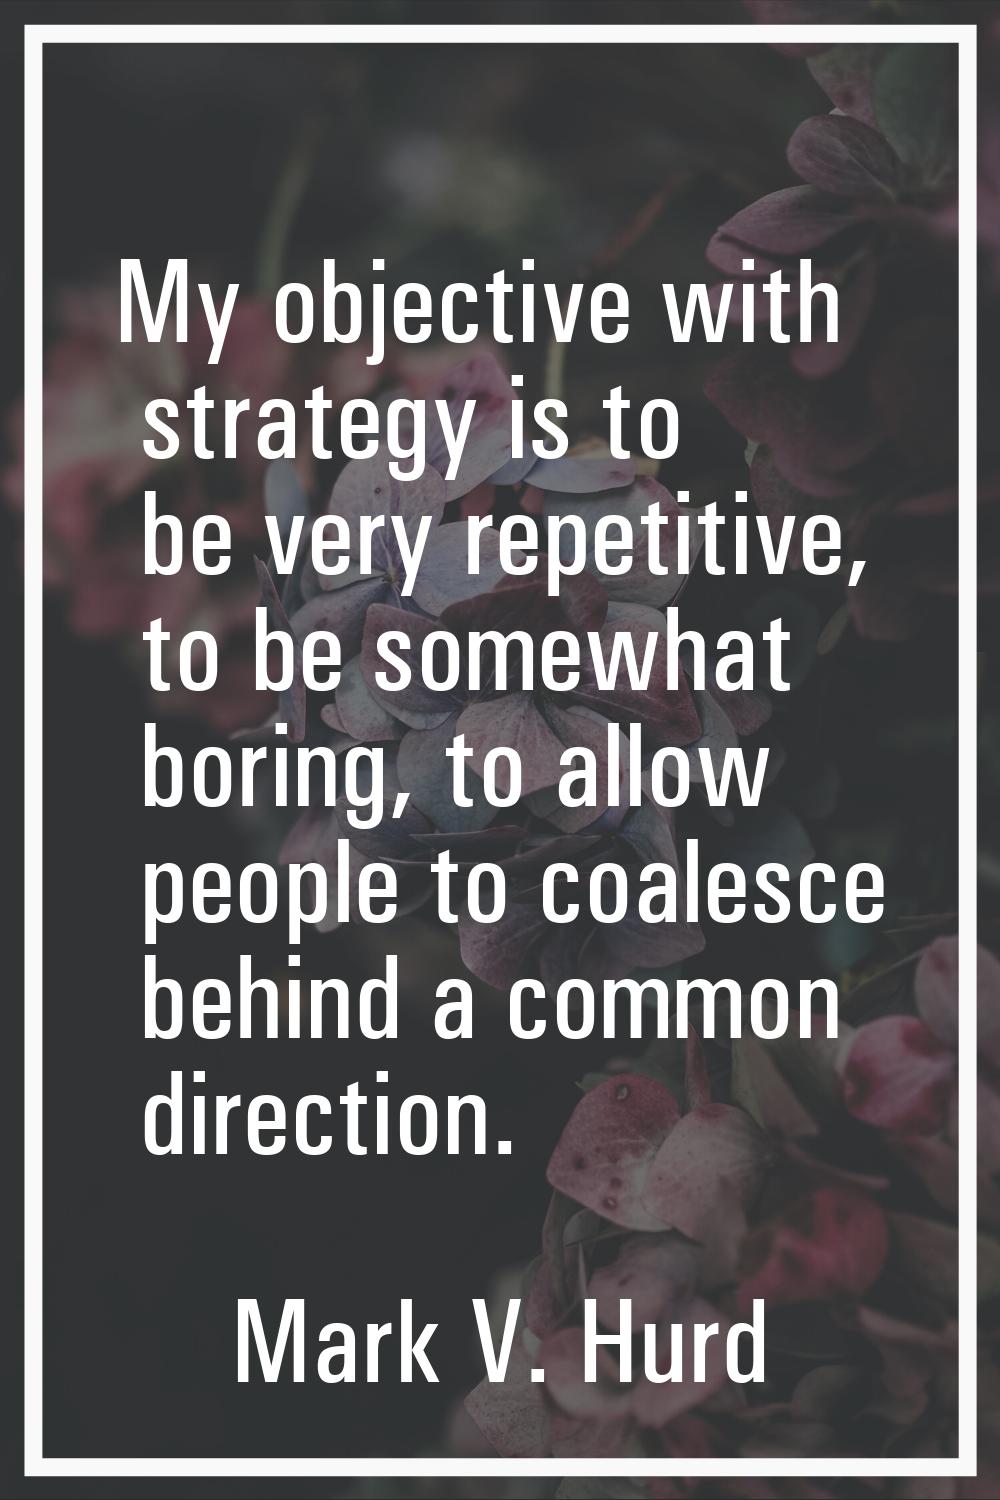 My objective with strategy is to be very repetitive, to be somewhat boring, to allow people to coal